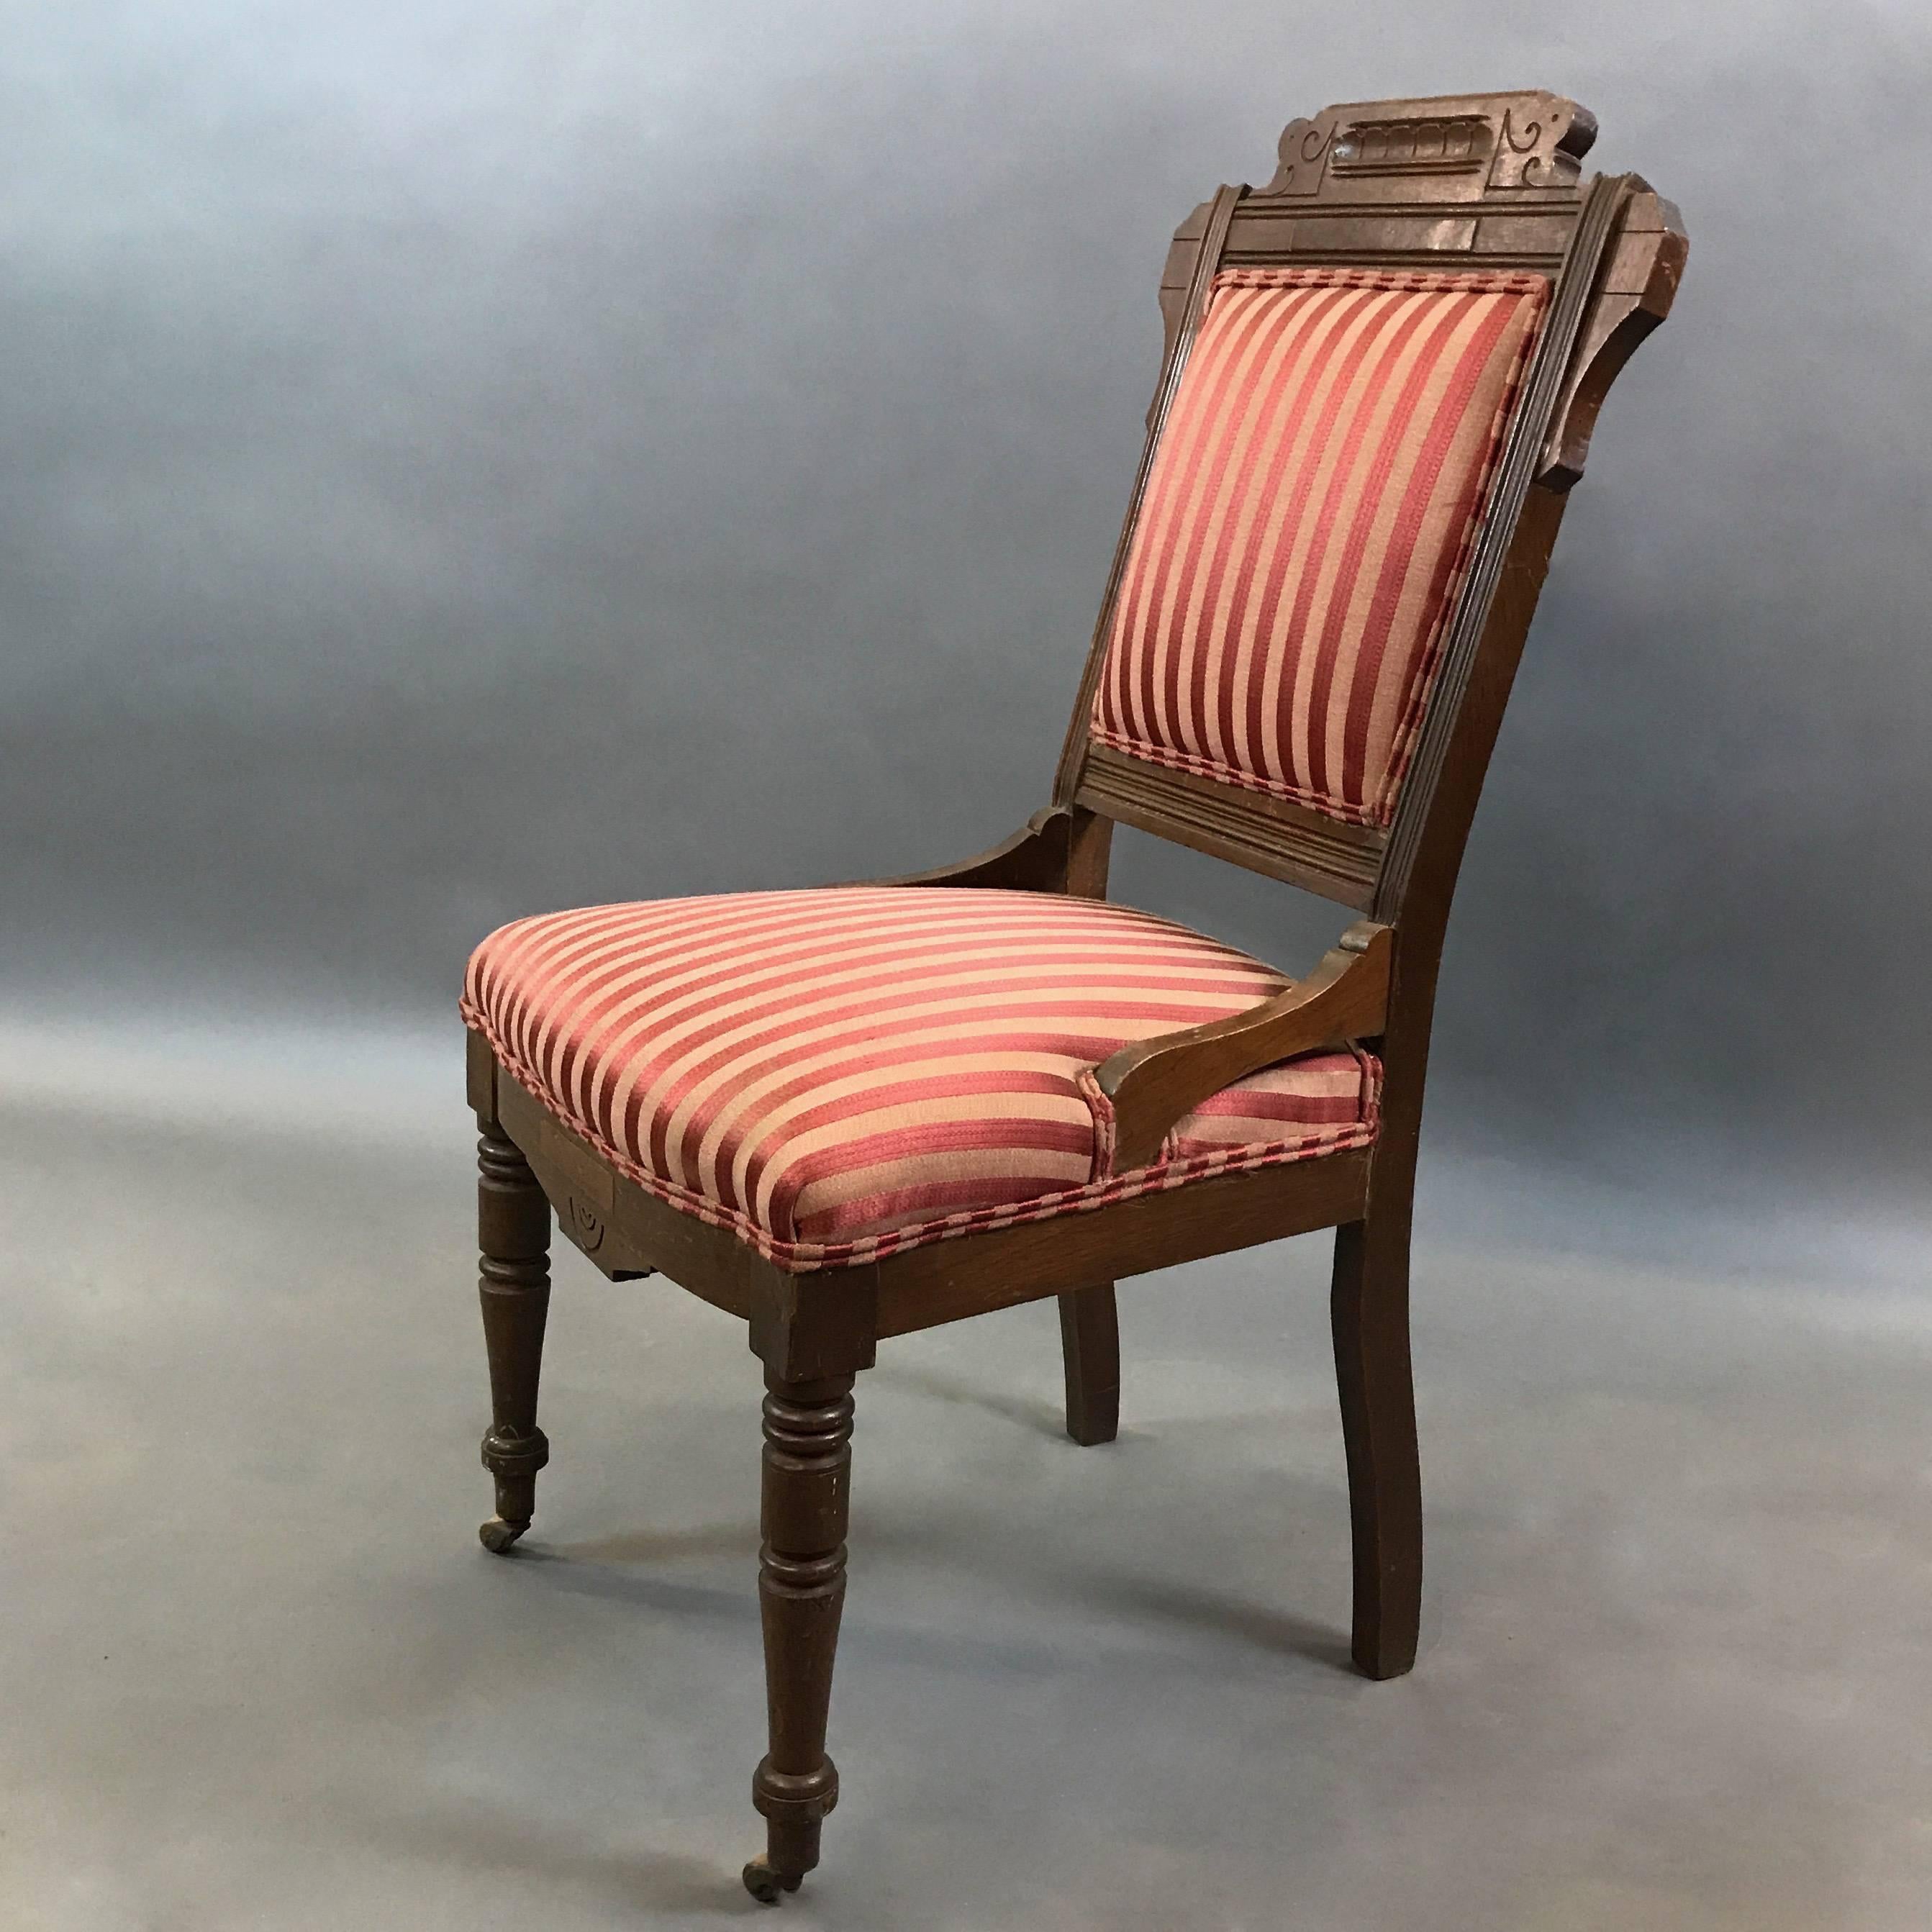 Late 19th century, Eastlake, Victorian, carved mahogany side chair with casters on its front legs features striped silk upholstered seat and back.